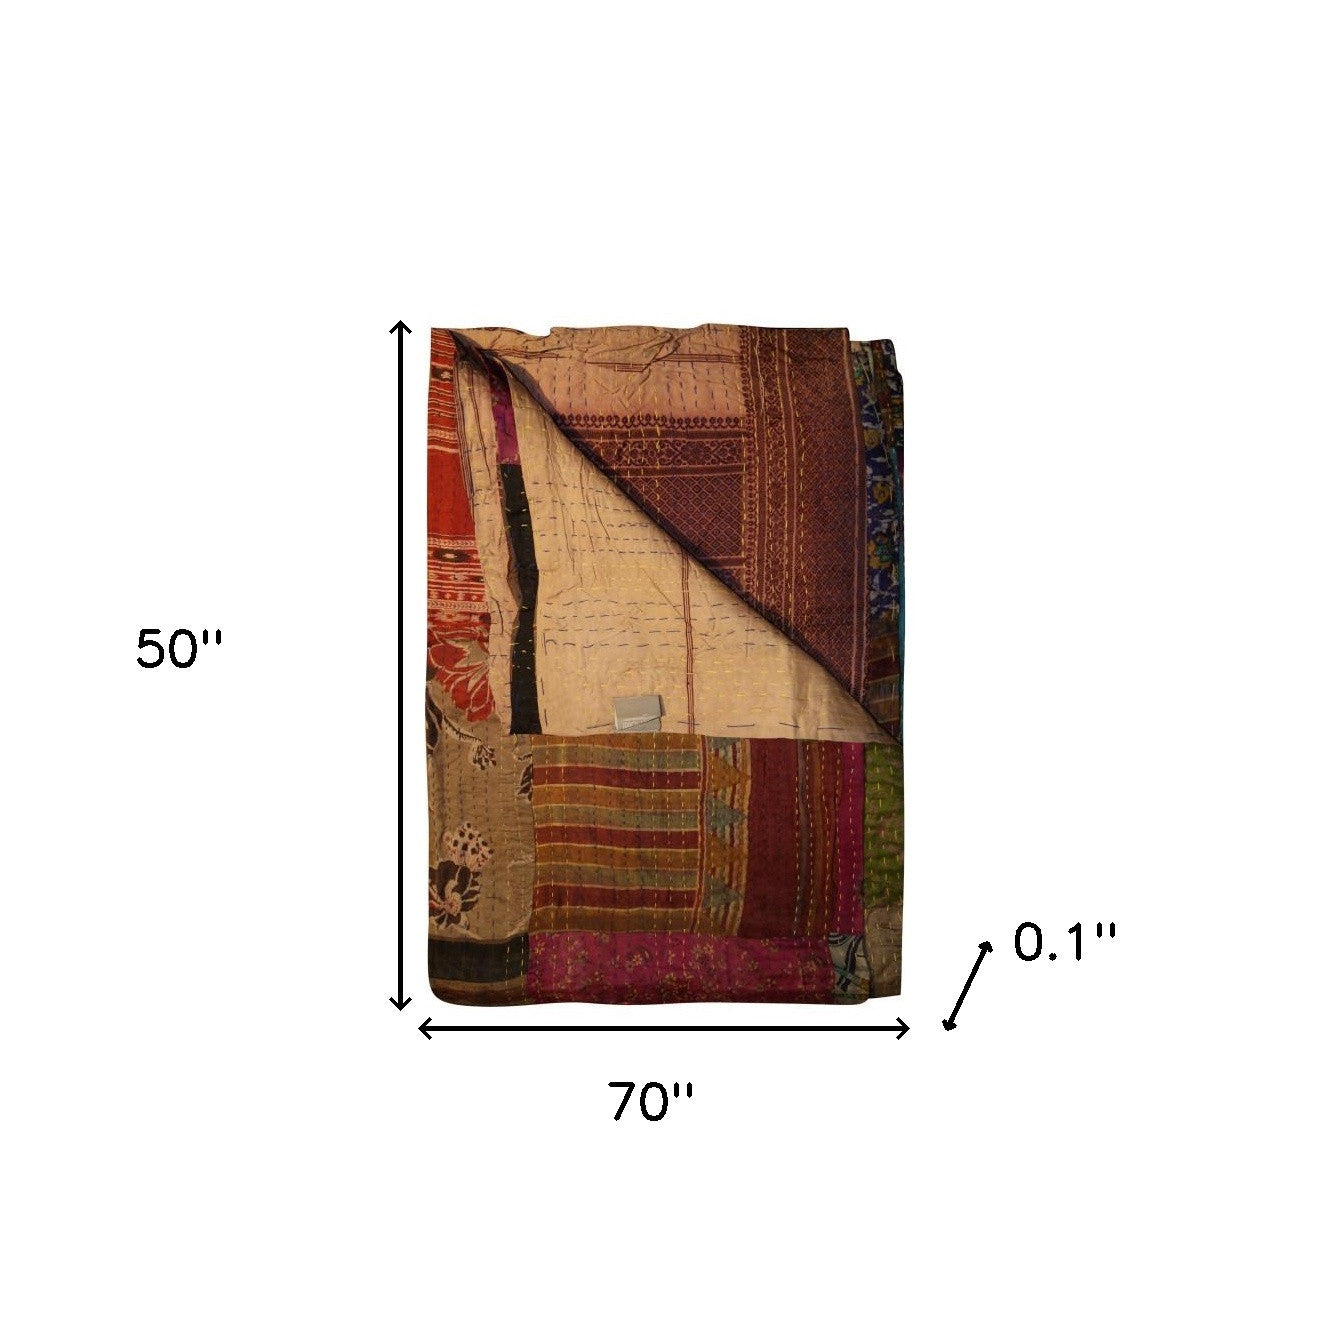 50" X 70" Burgundy and Brown Quilted Cotton Patchwork Throw Blanket with Embroidery